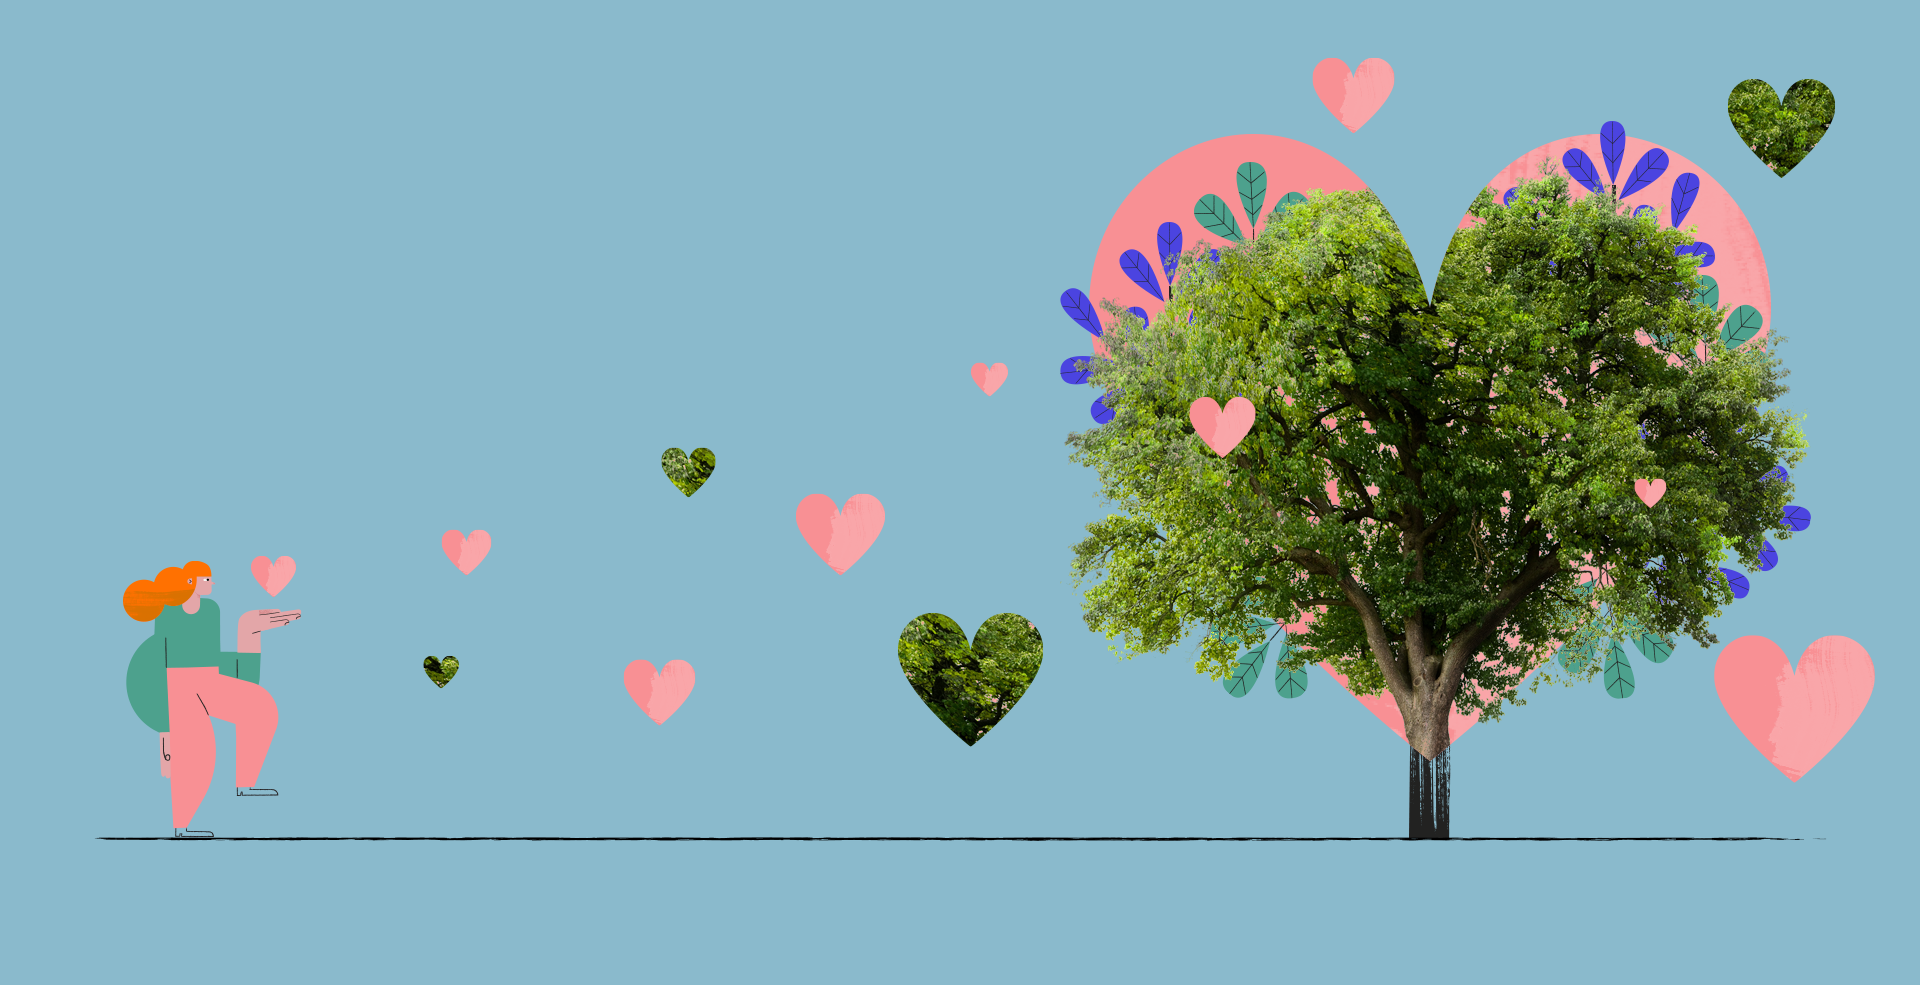 It’s good to be friends with trees - It pays to go green!